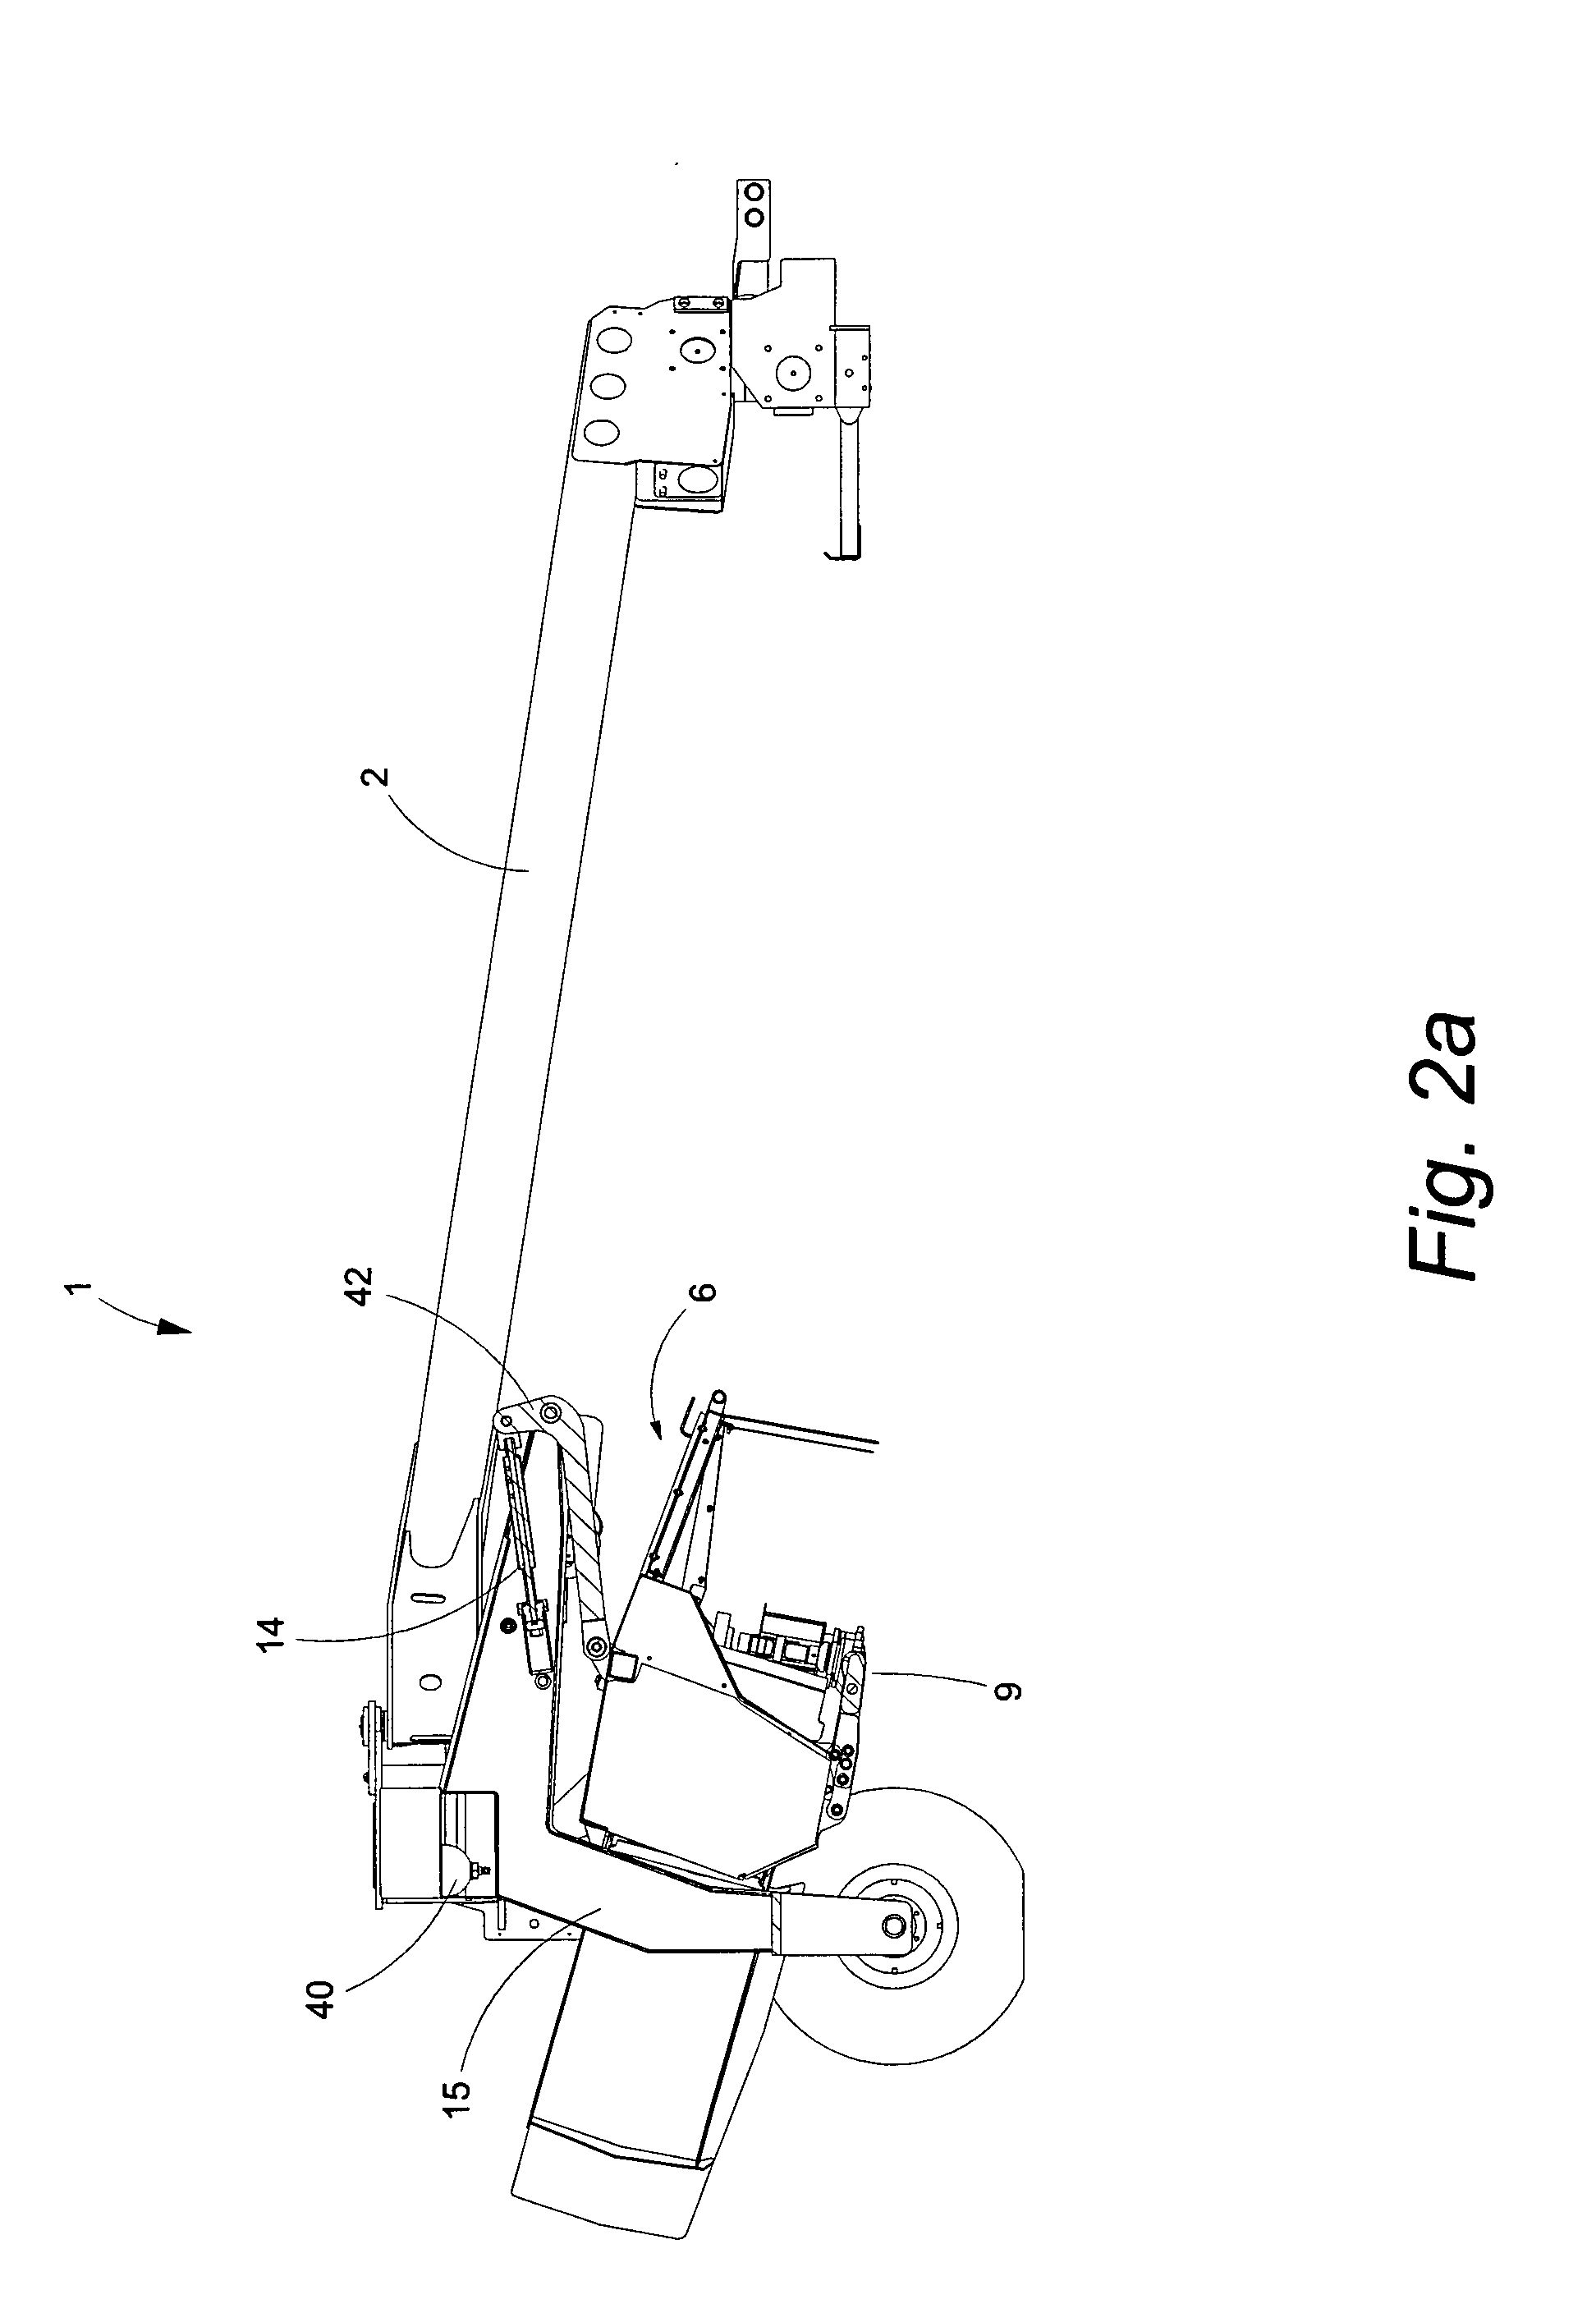 Suspension system for a floating header on an agricultural implement